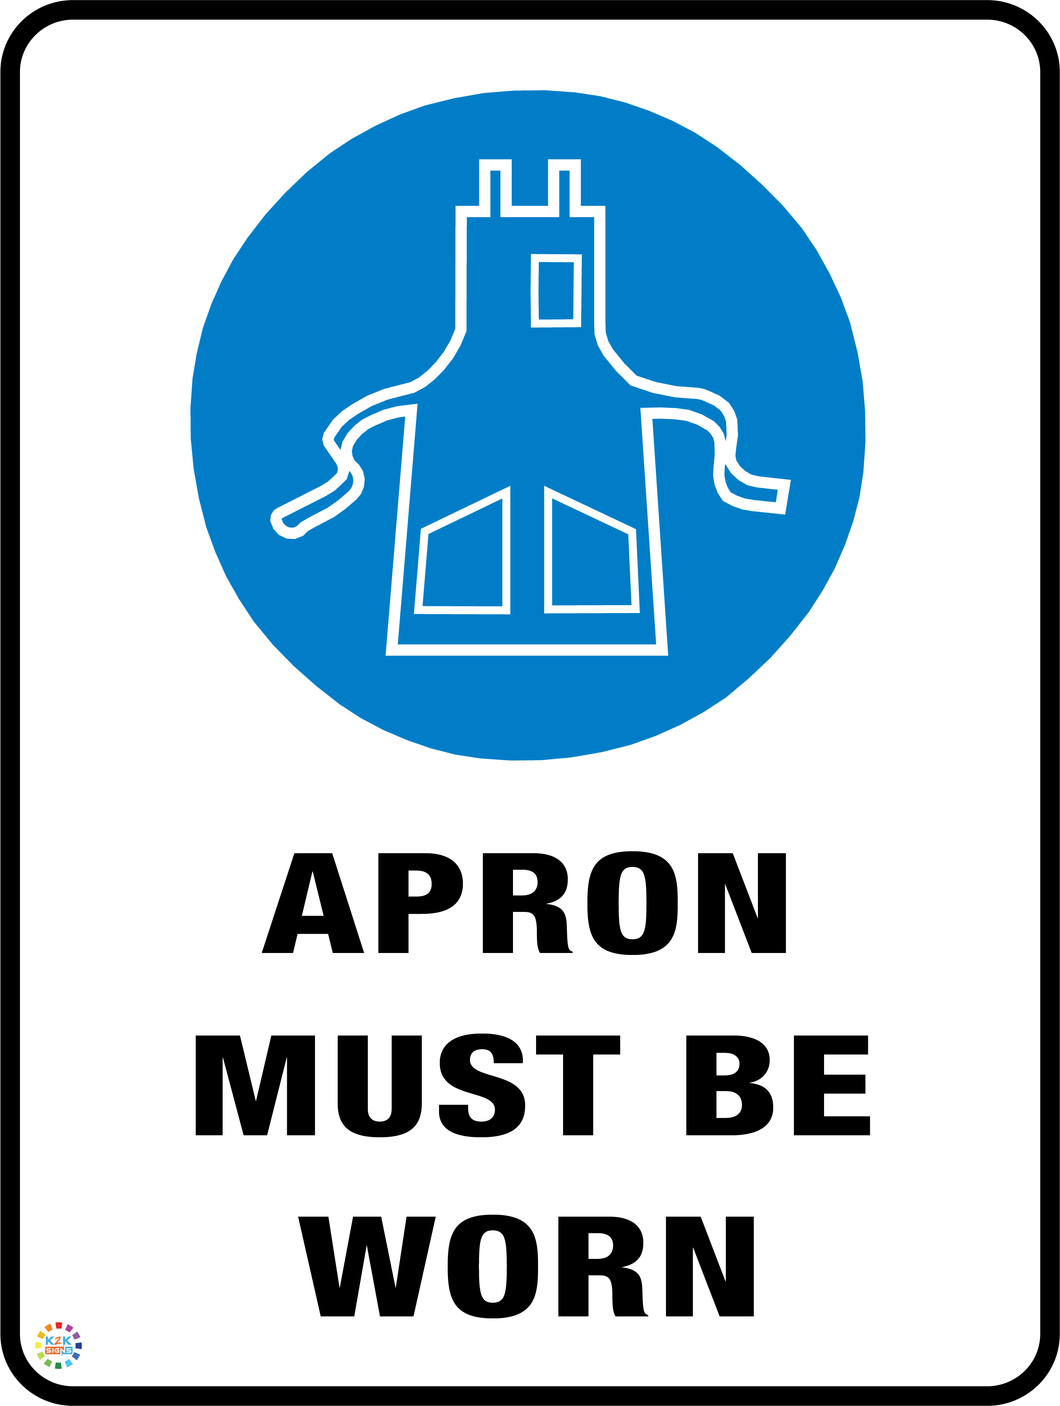 Apron Must Be Worn